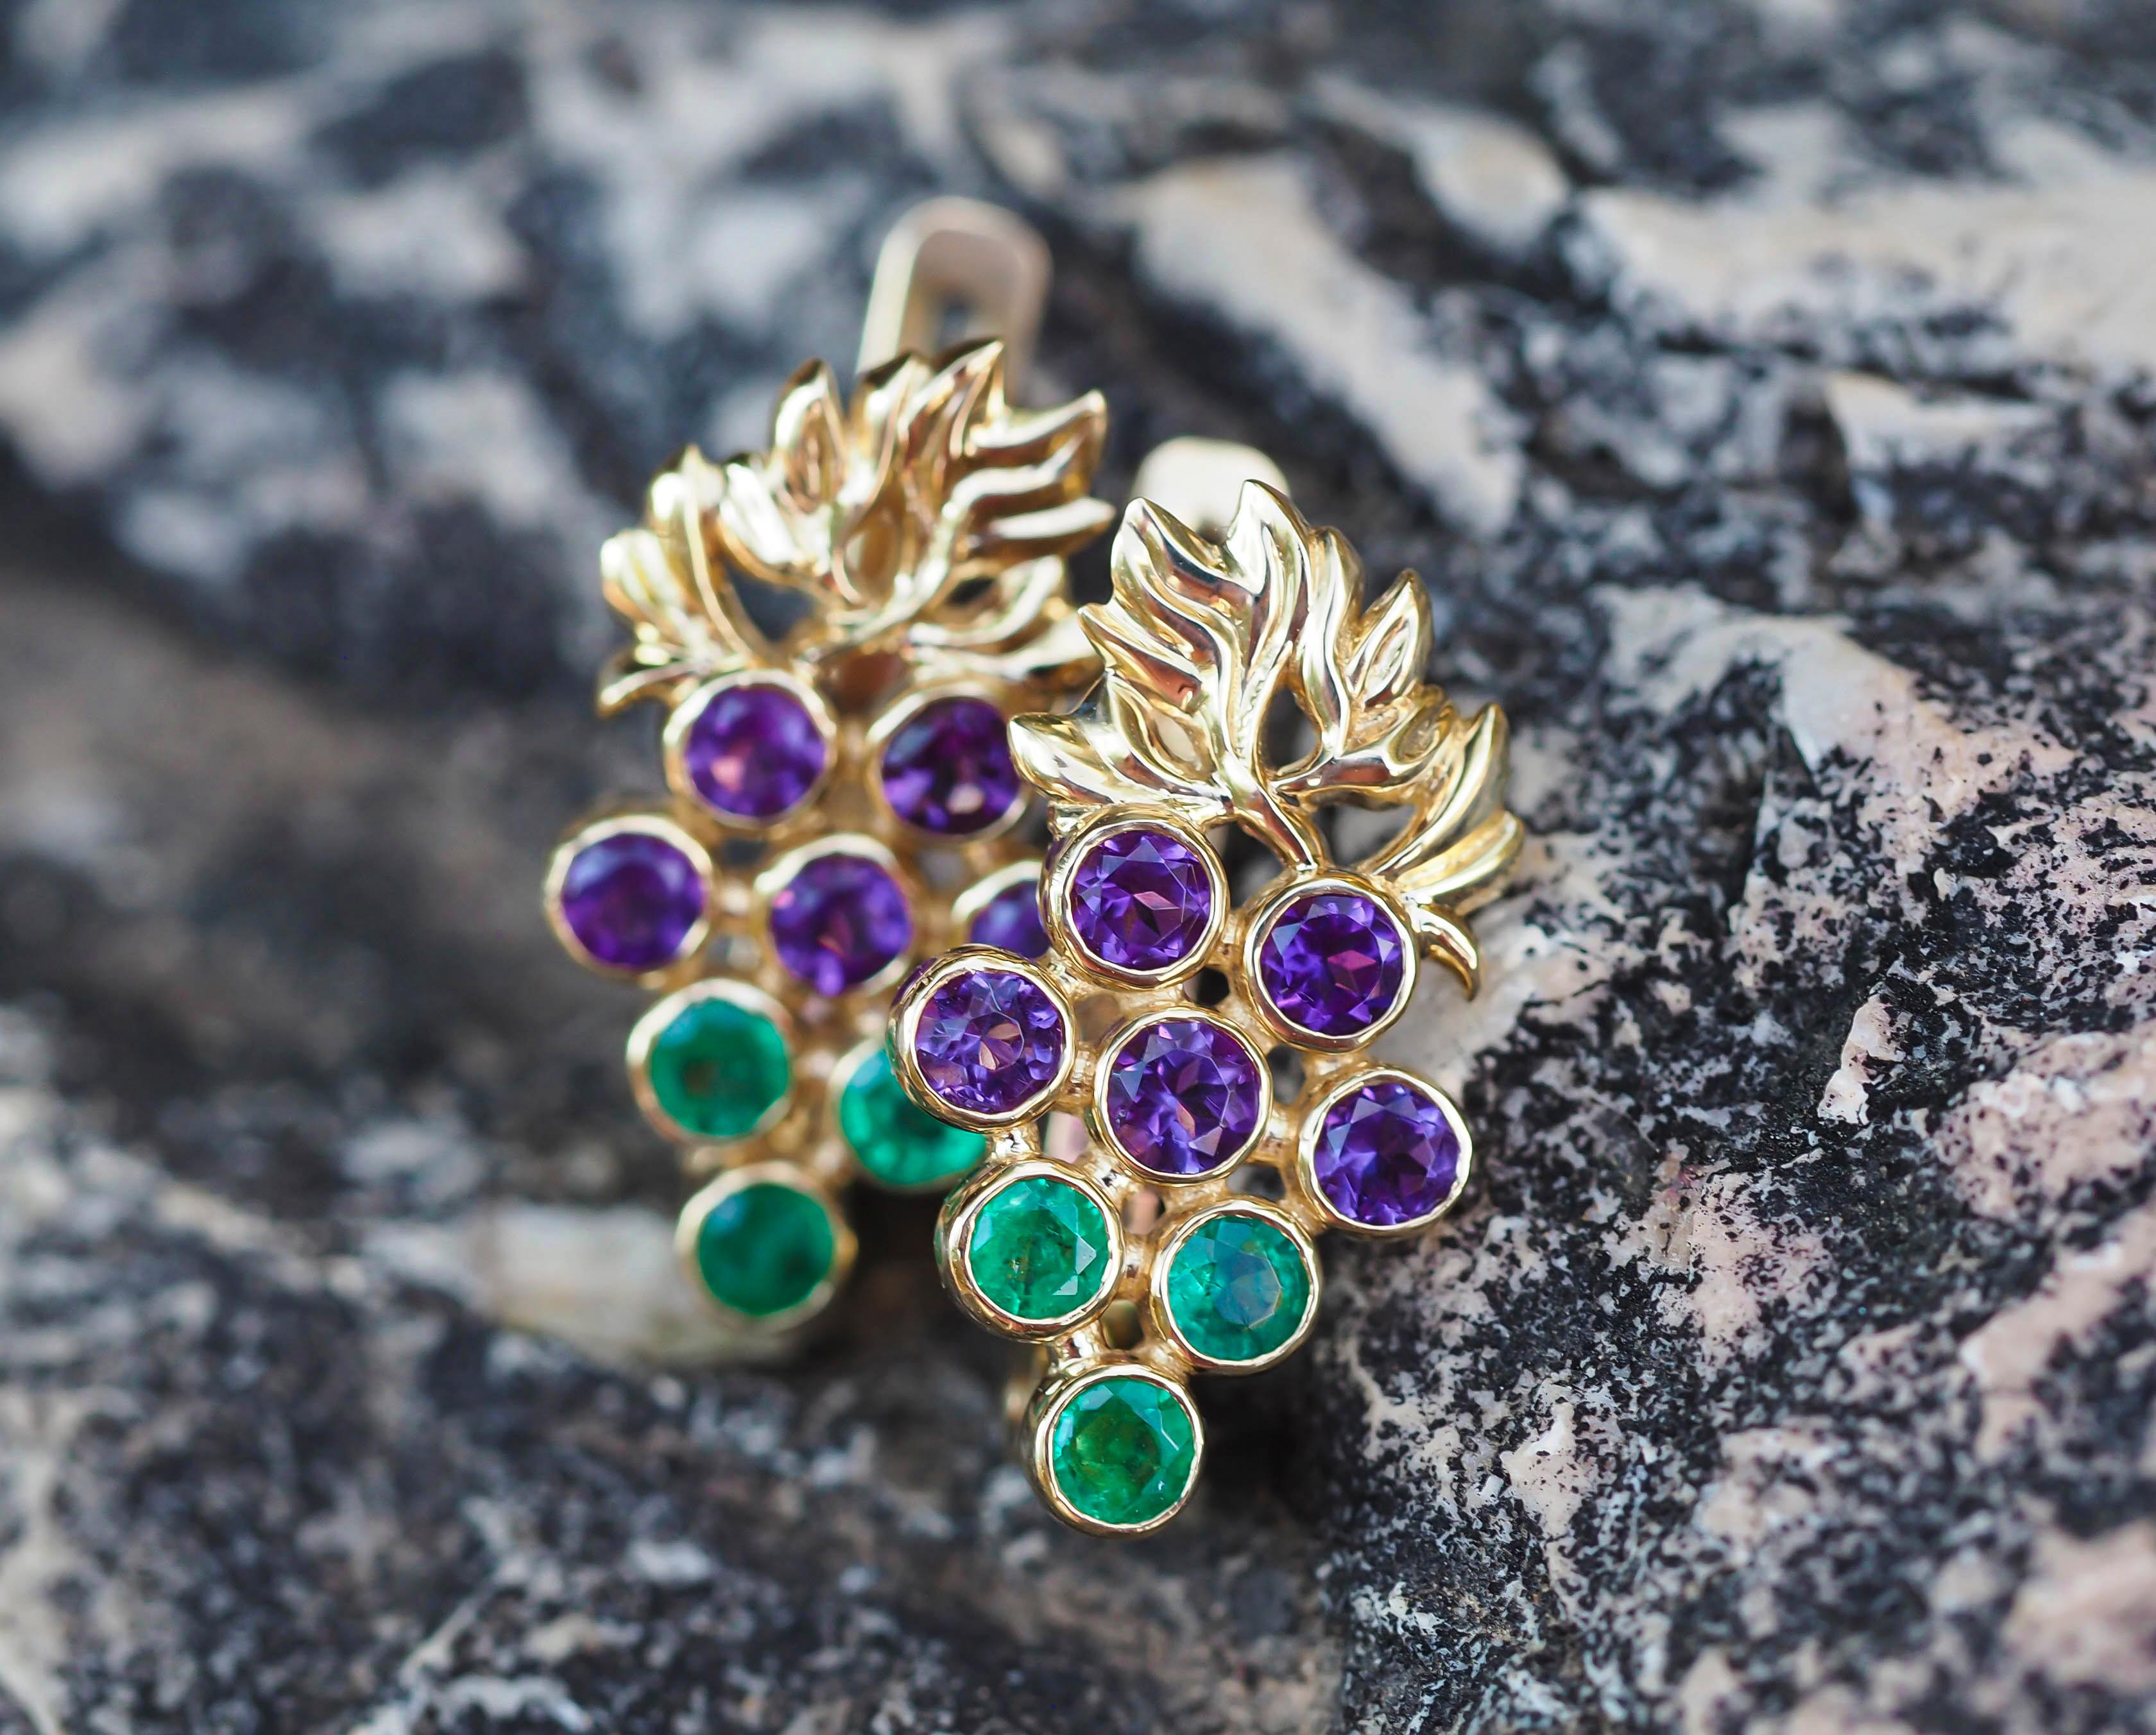 14k Gold Grape Earrings with Emeralds and Amethysts For Sale 6